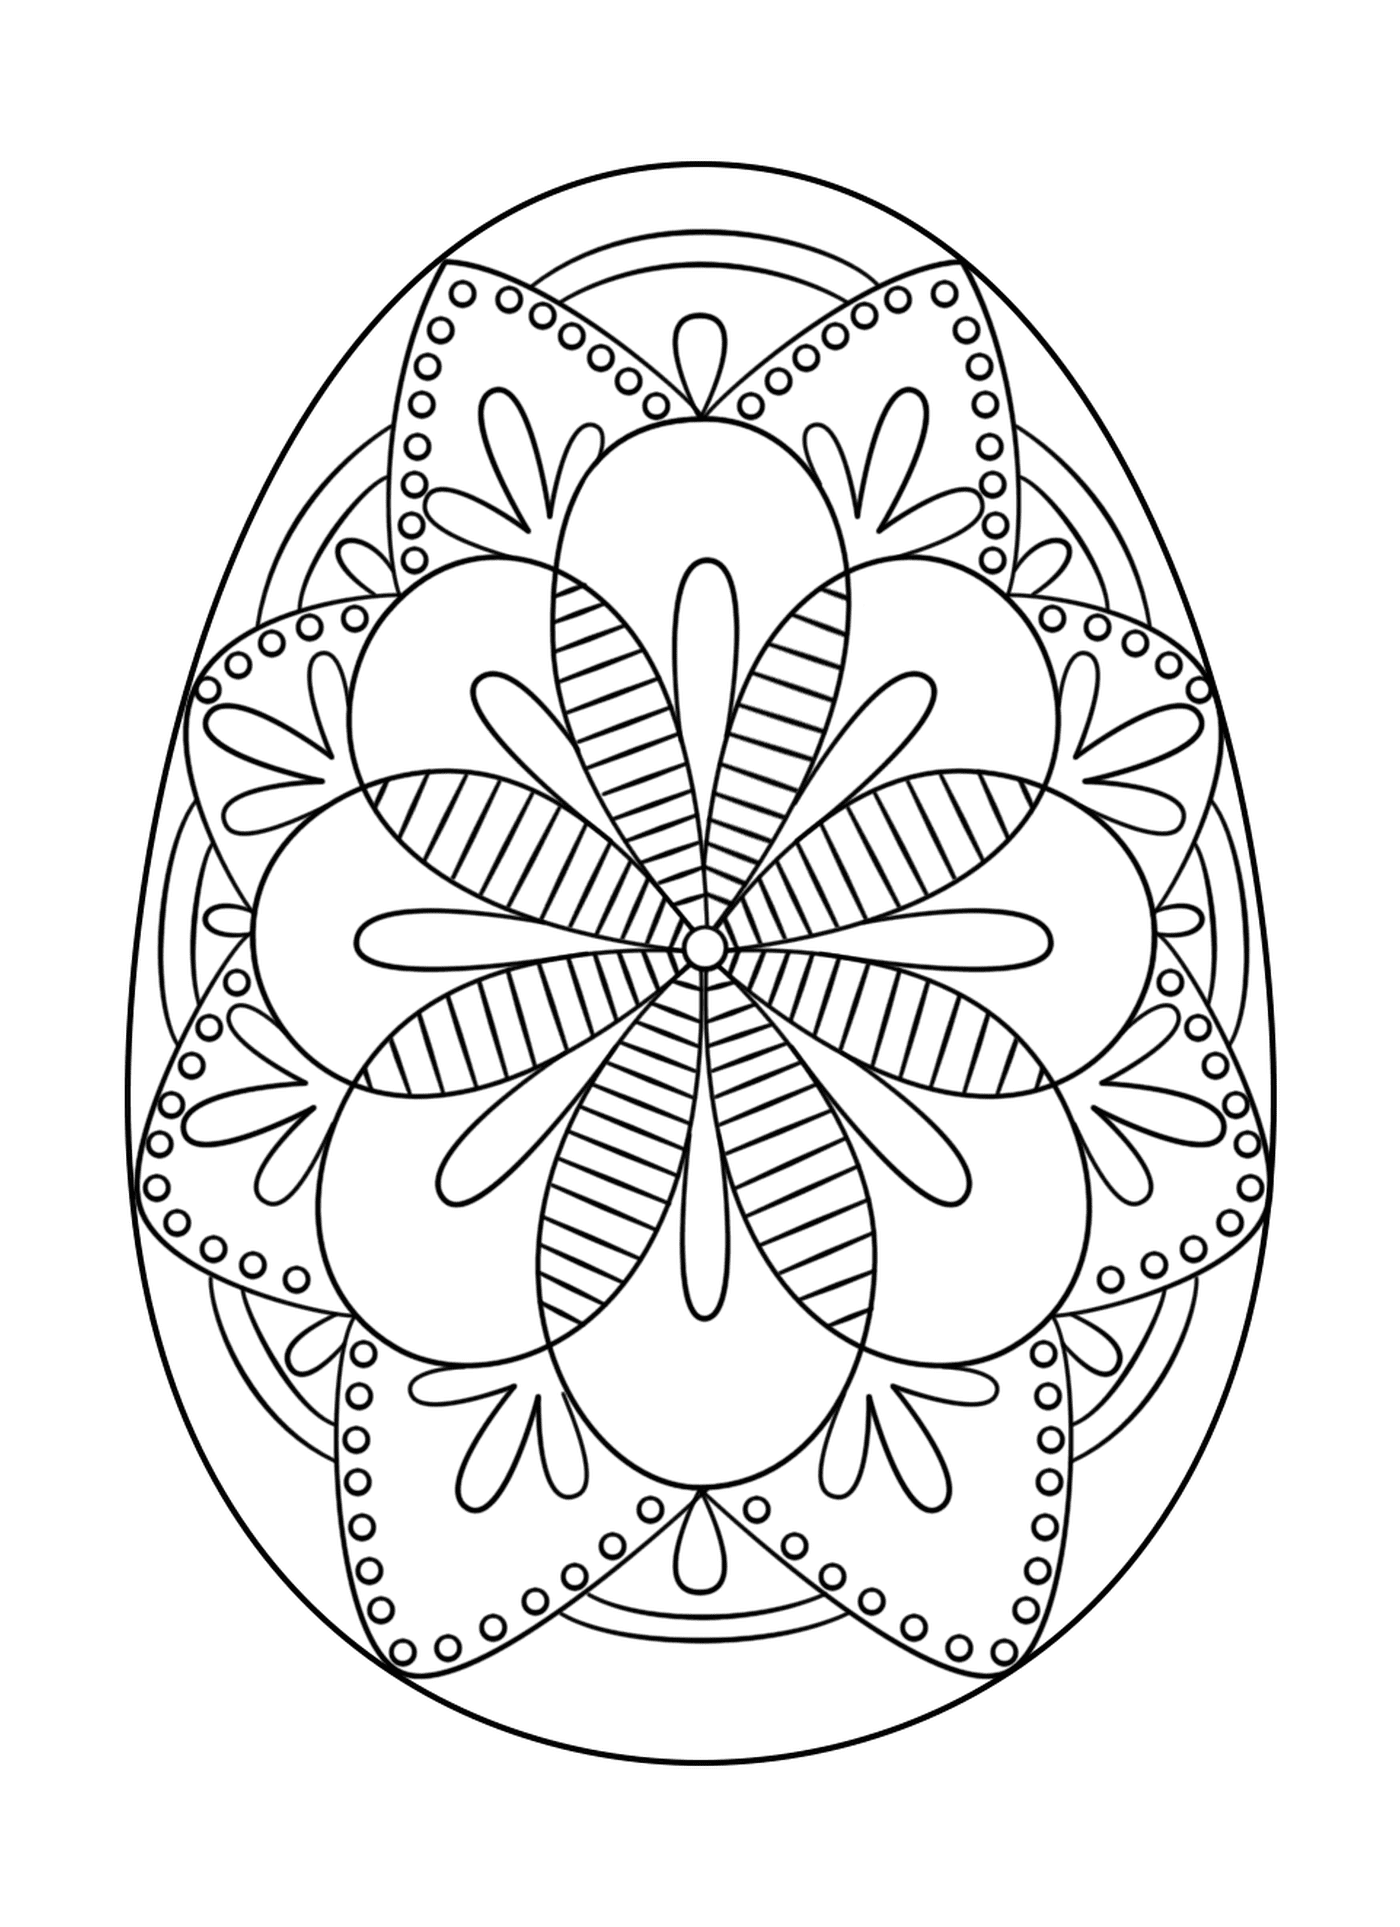 intricate oeuf de paques